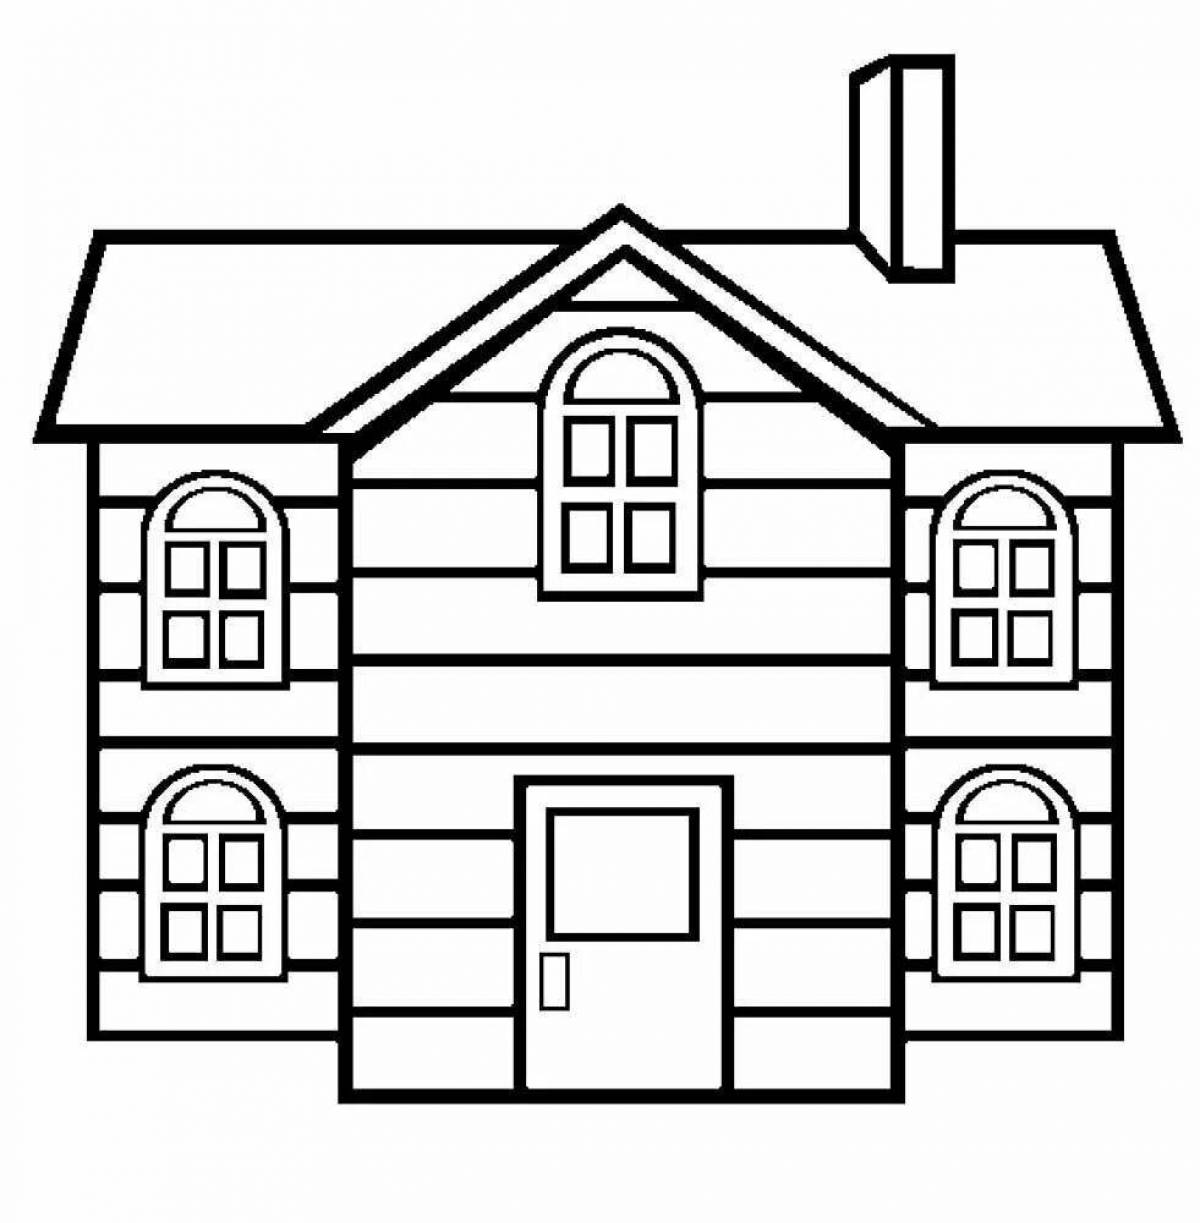 Coloring page dazzling two-story house